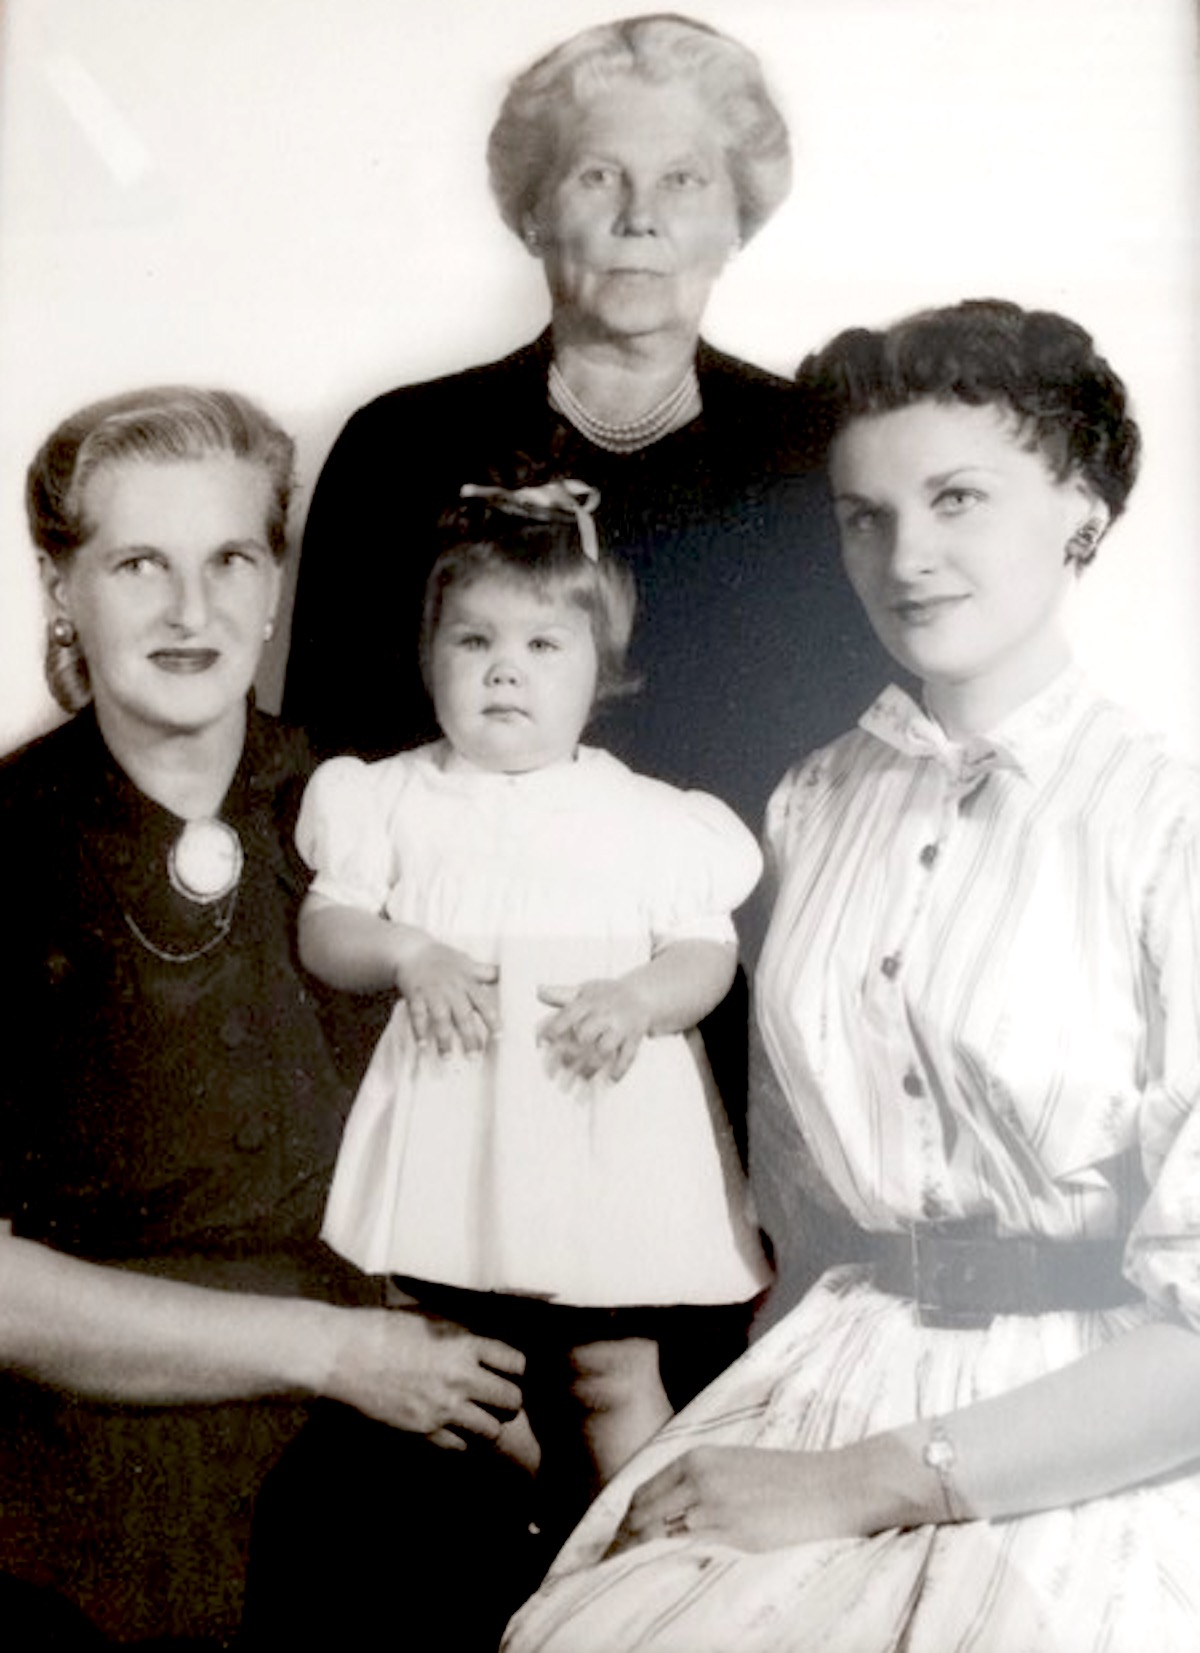 Amy Ross, her great grandmother, her maternal grandmother, and her mother at Amy’s first birthday celebration, April 1954. She credits them as “very strong influences in [her] life.”